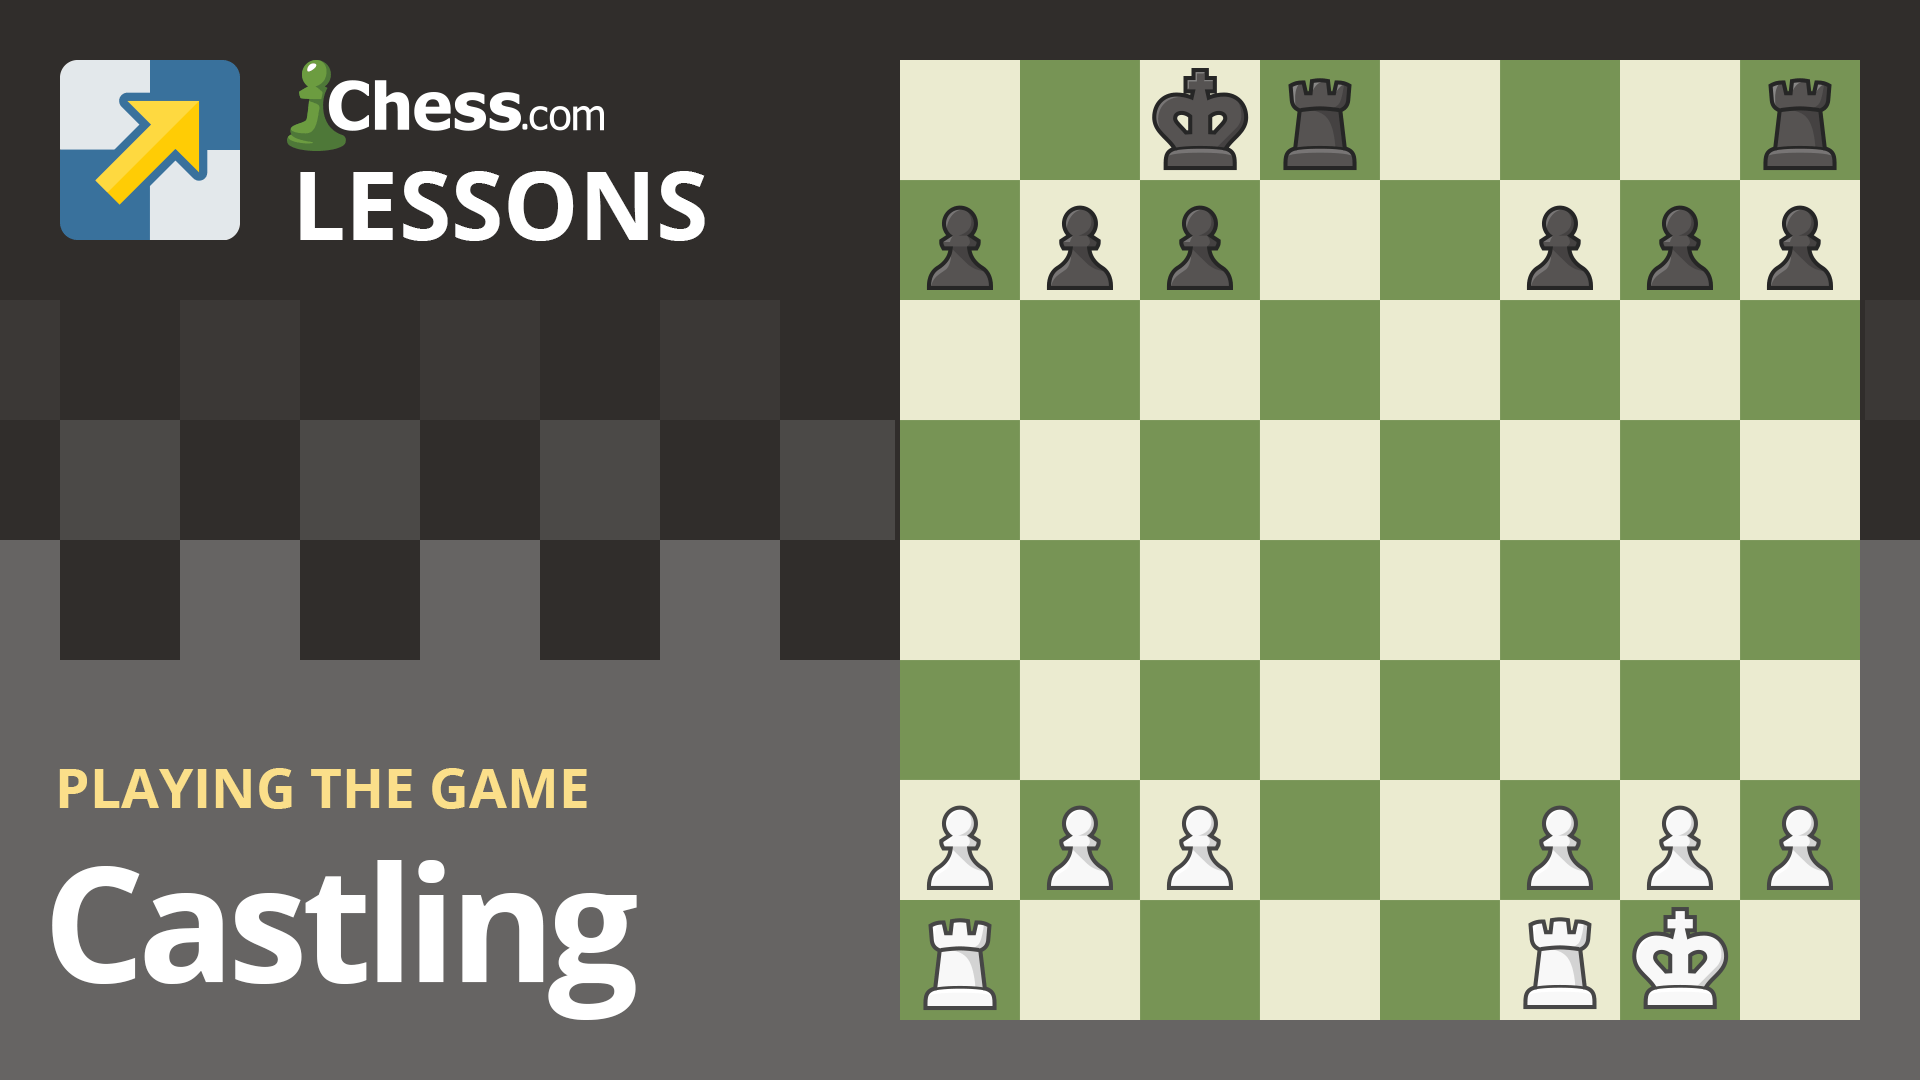 How to Castle in Chess? - Chess.com